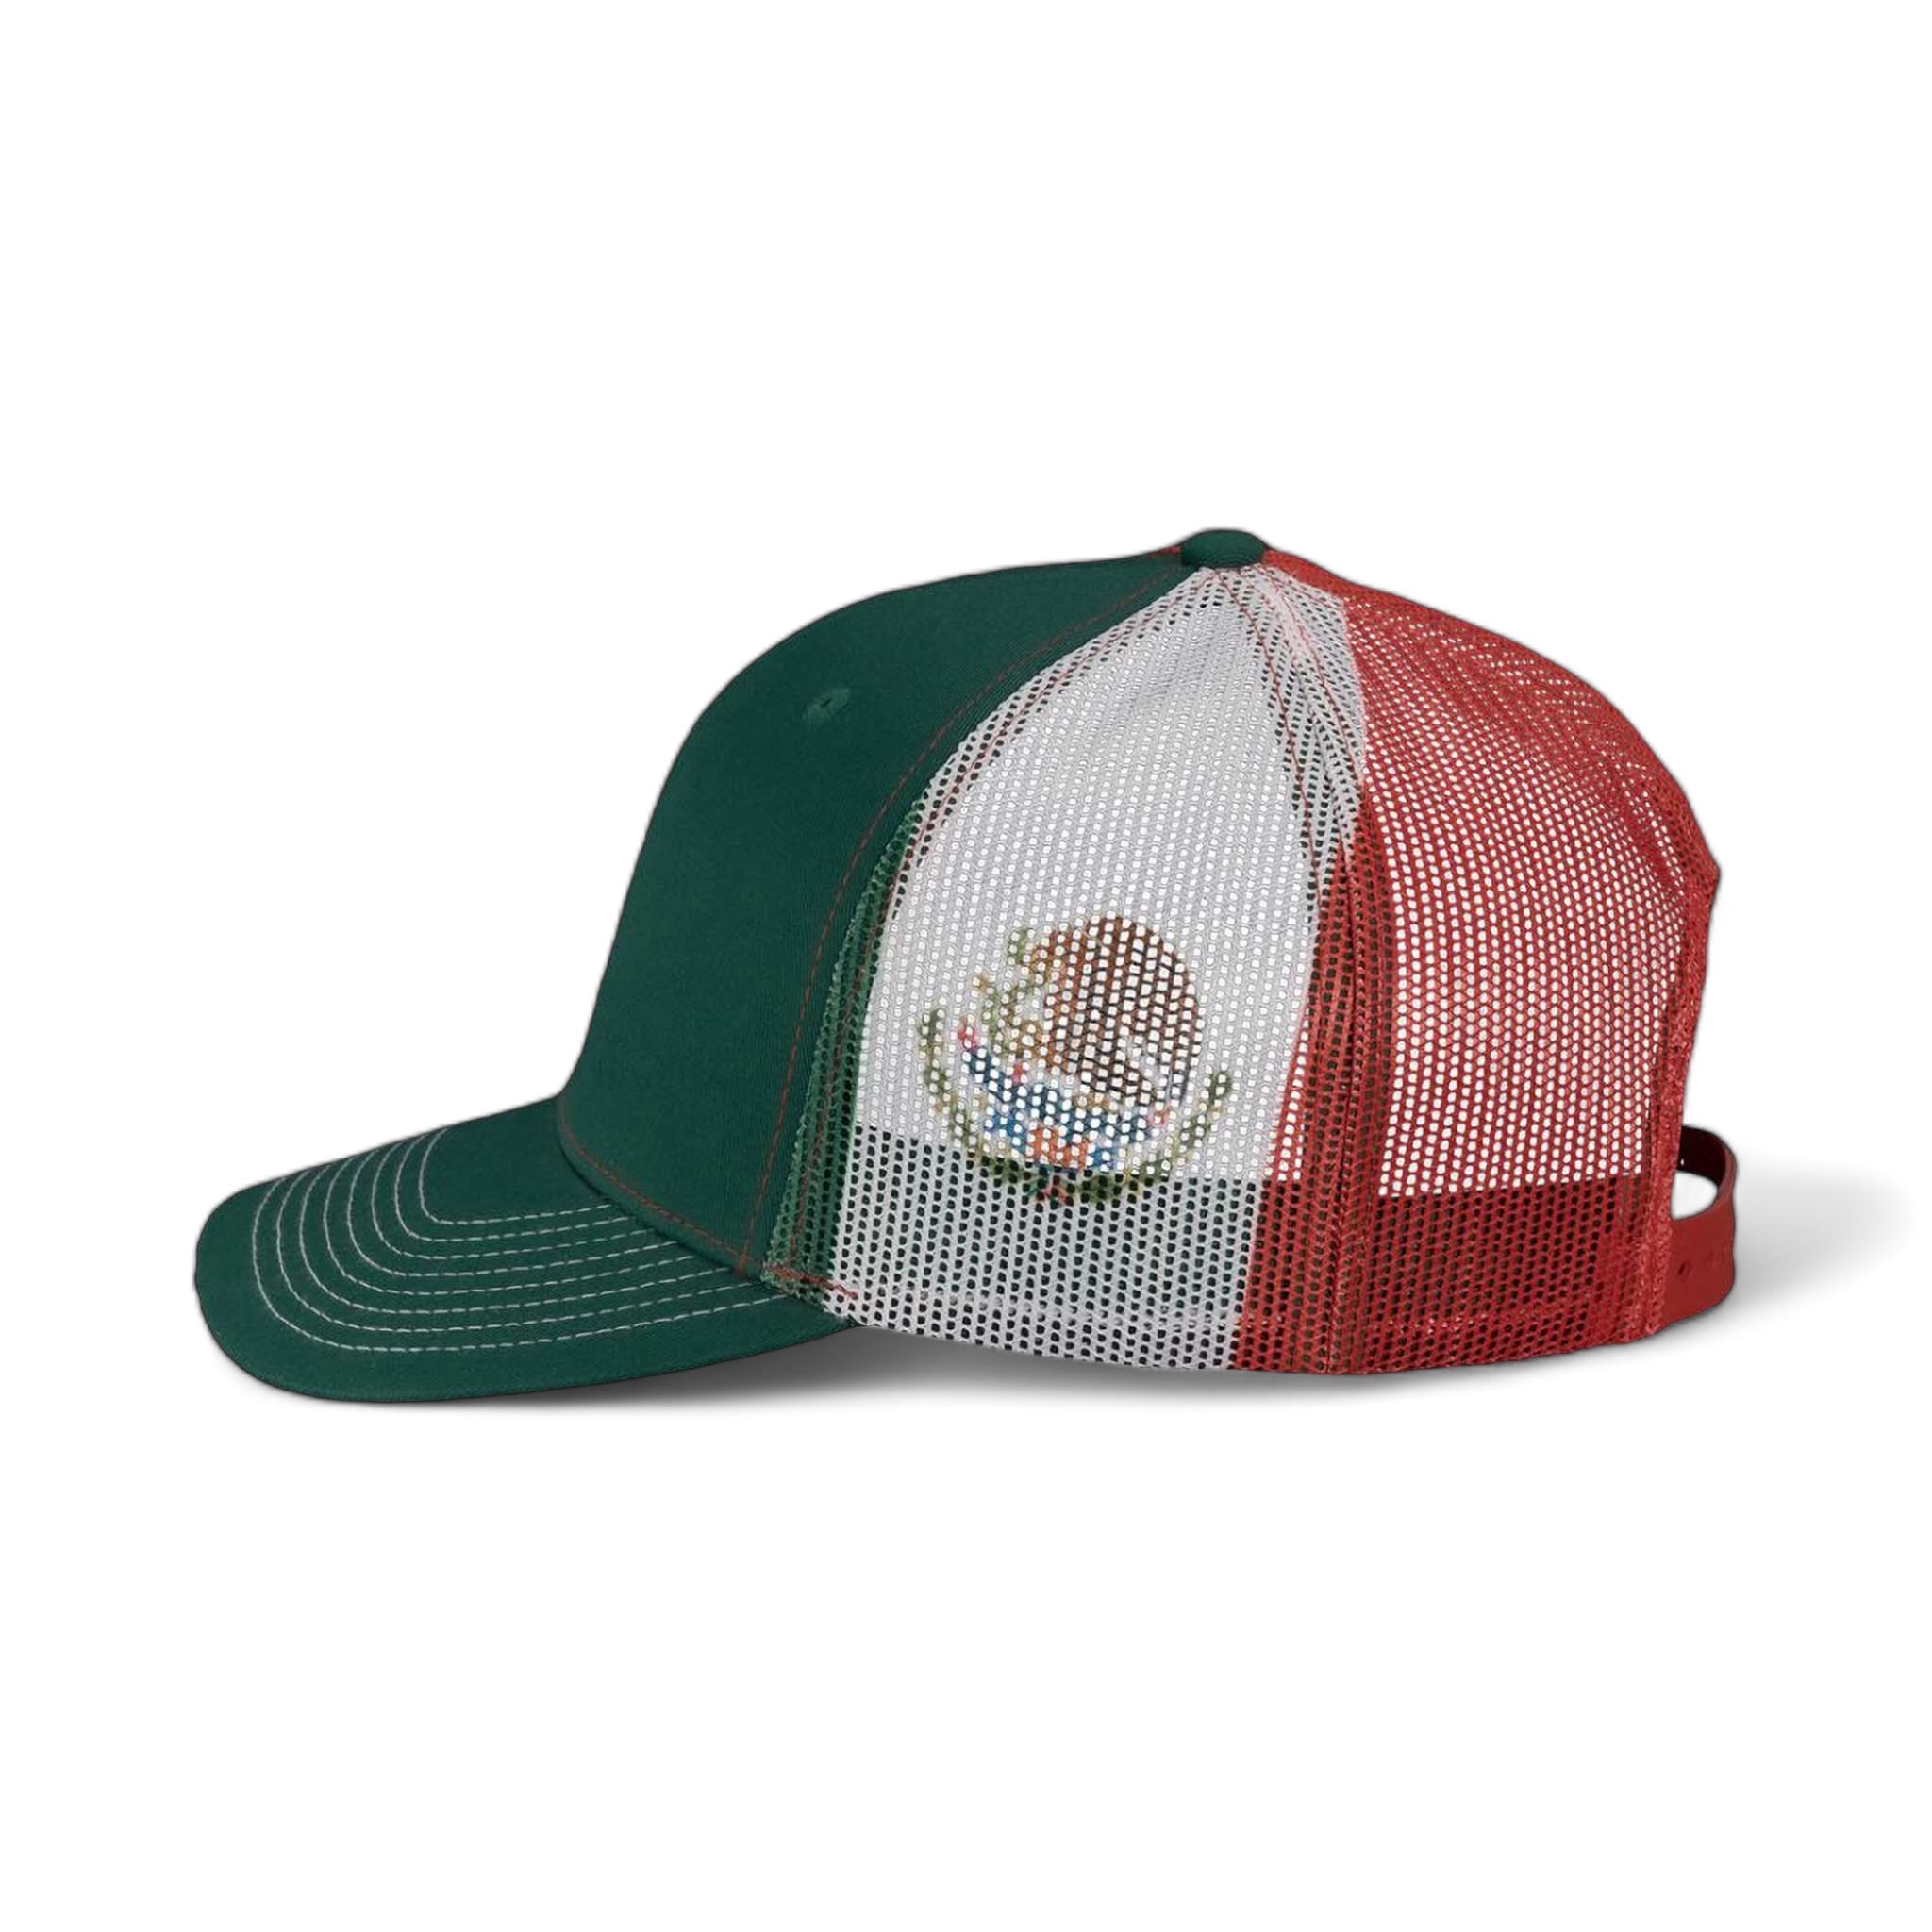 Side view of Kati S700M custom hat in dark green, red and mexico flag